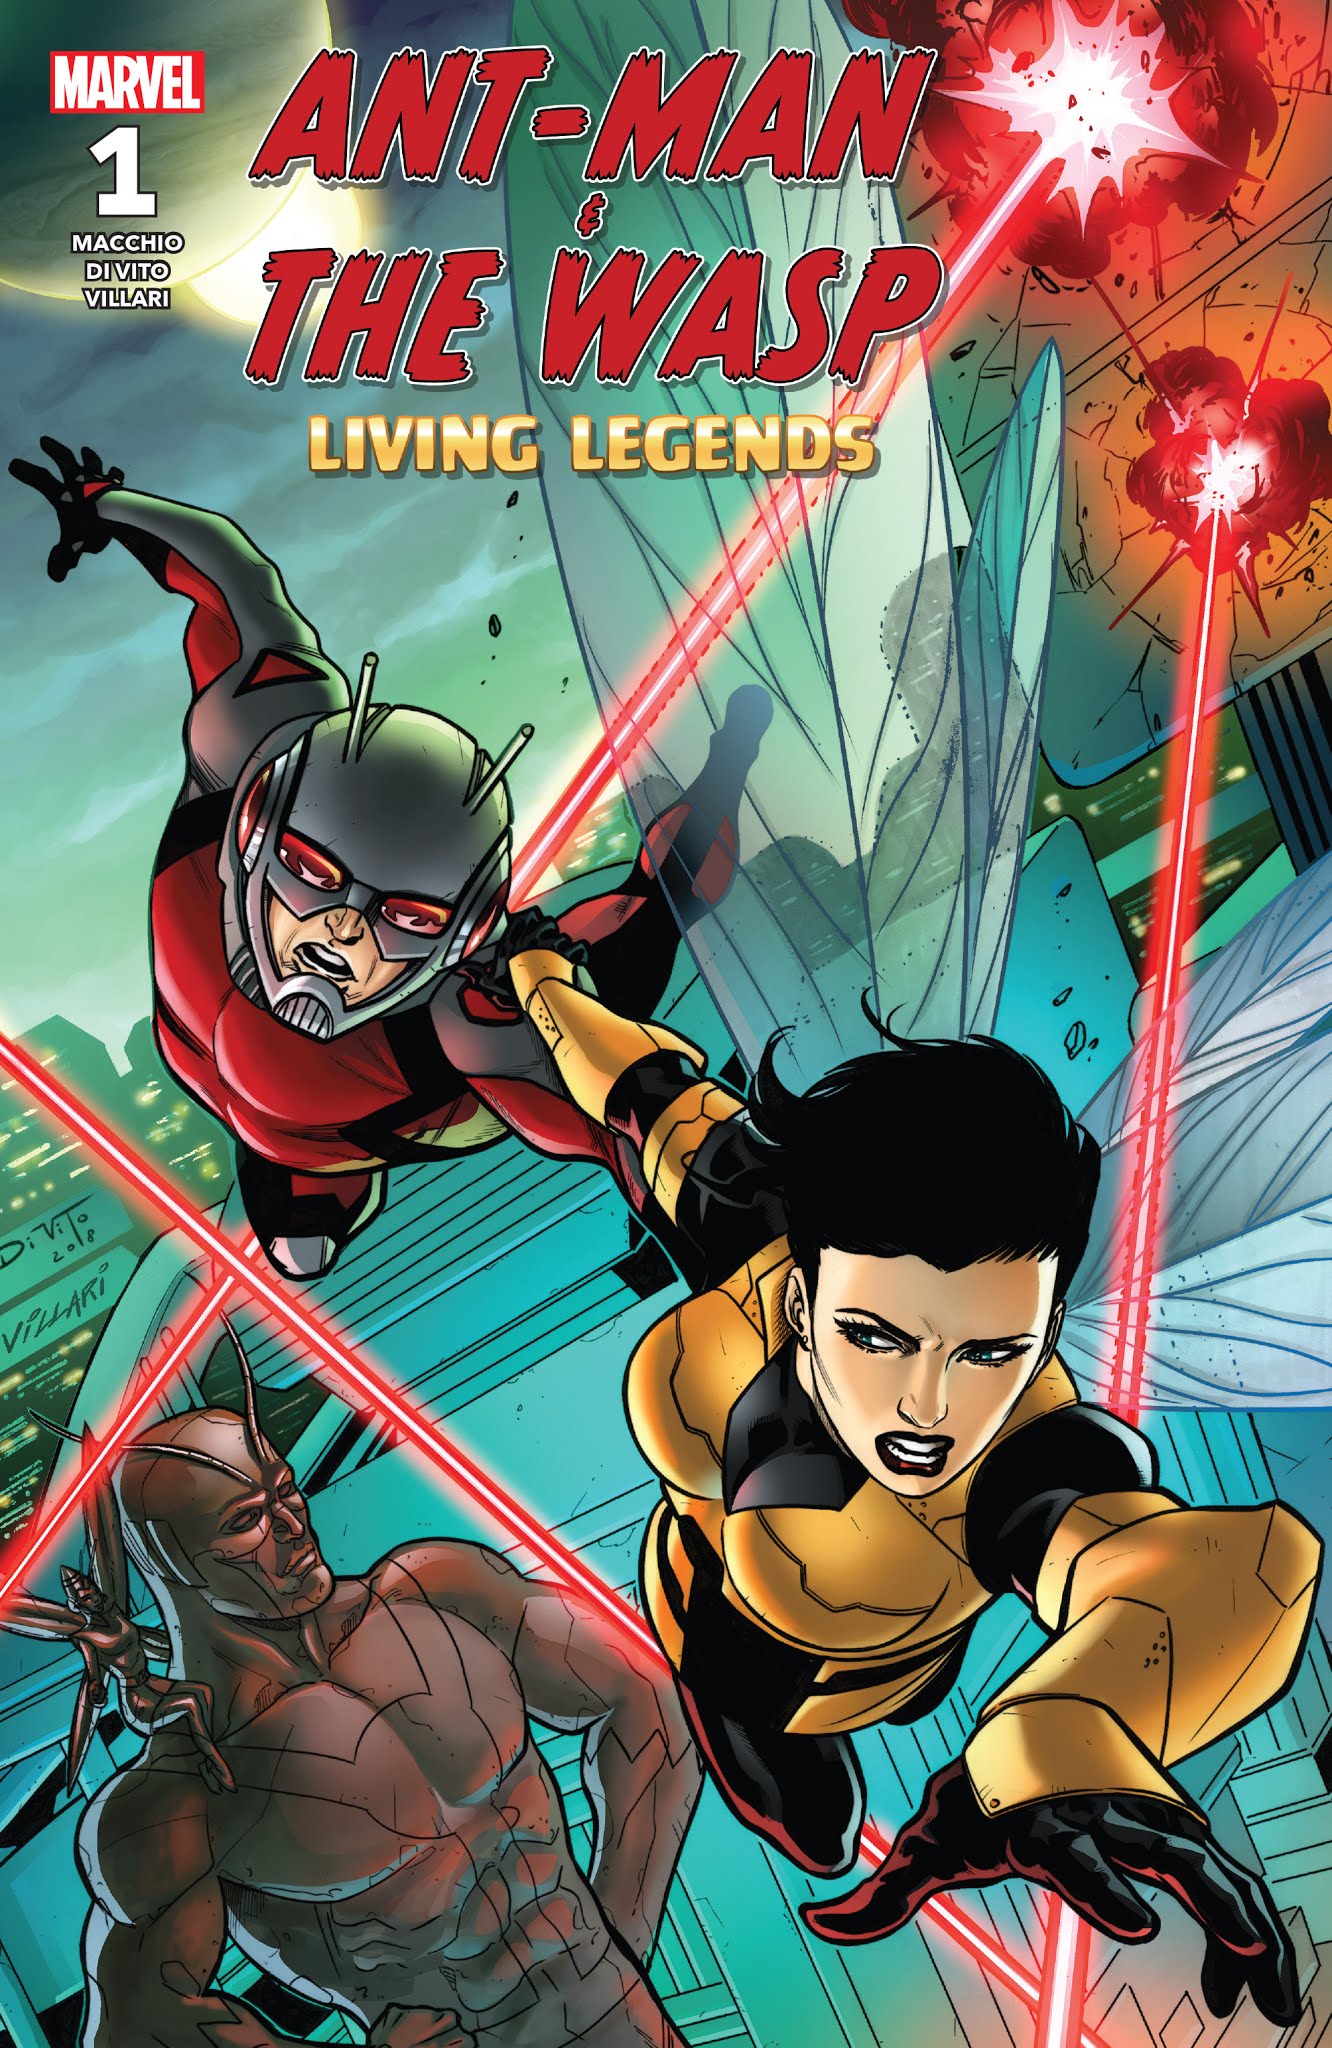 Read online Ant-Man & The Wasp: Living Legends comic -  Issue # Full - 1